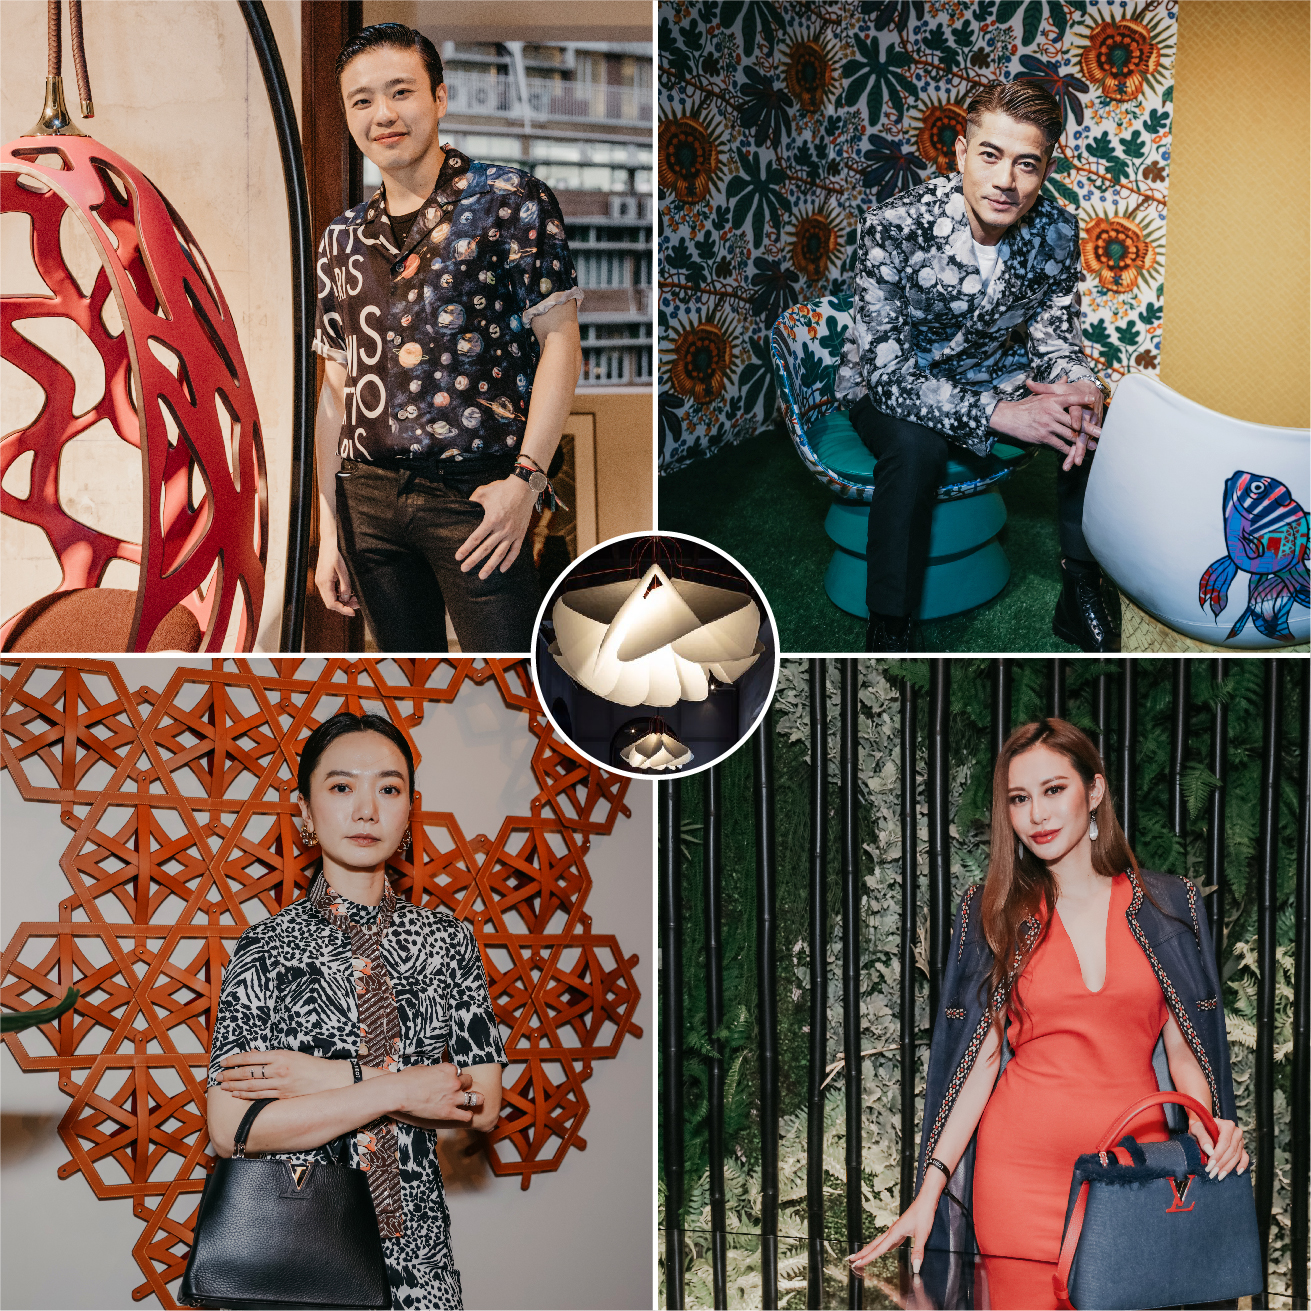 Louis Vuitton launches Objets Nomades in Hong Kong - Inside Retail Asia